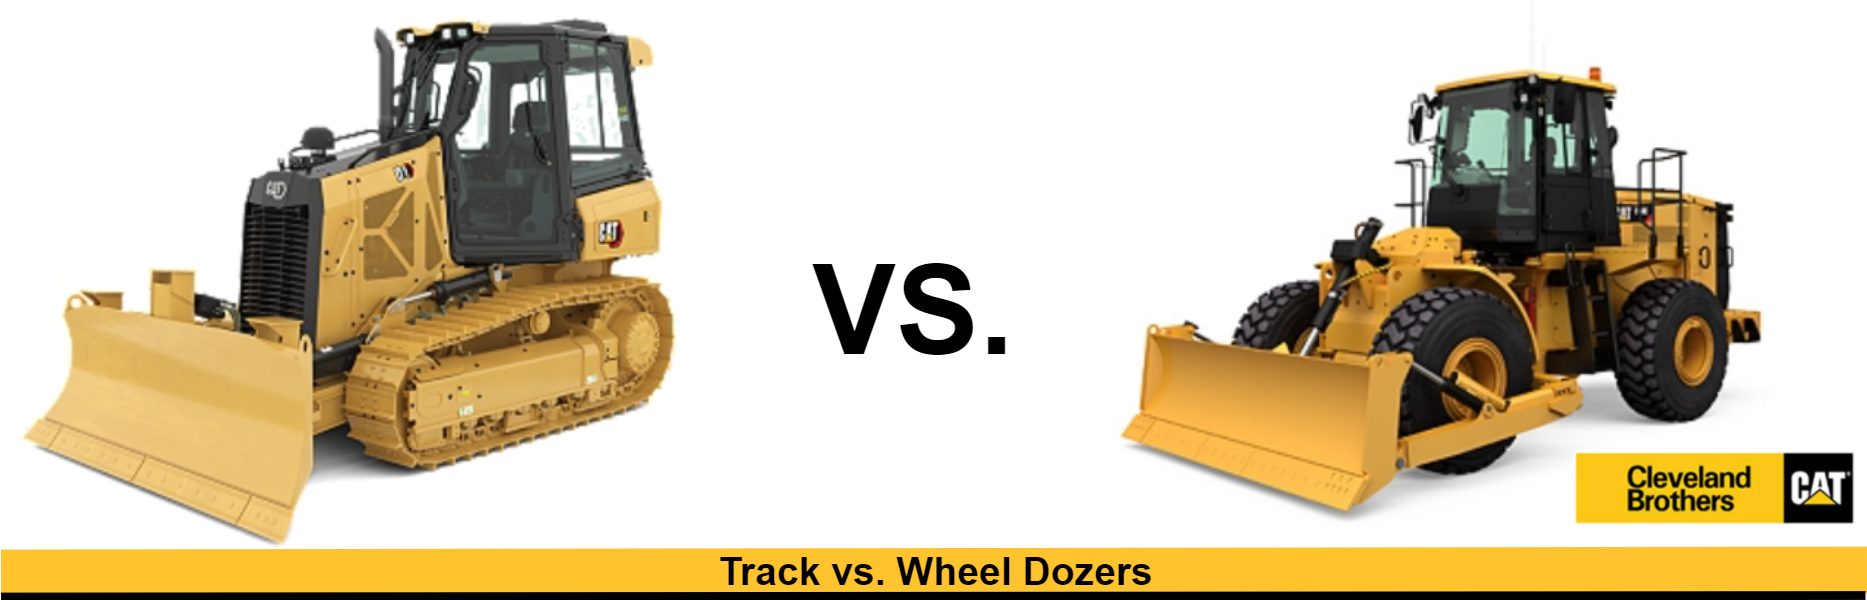 What is the difference between a crawler and a bulldozer?